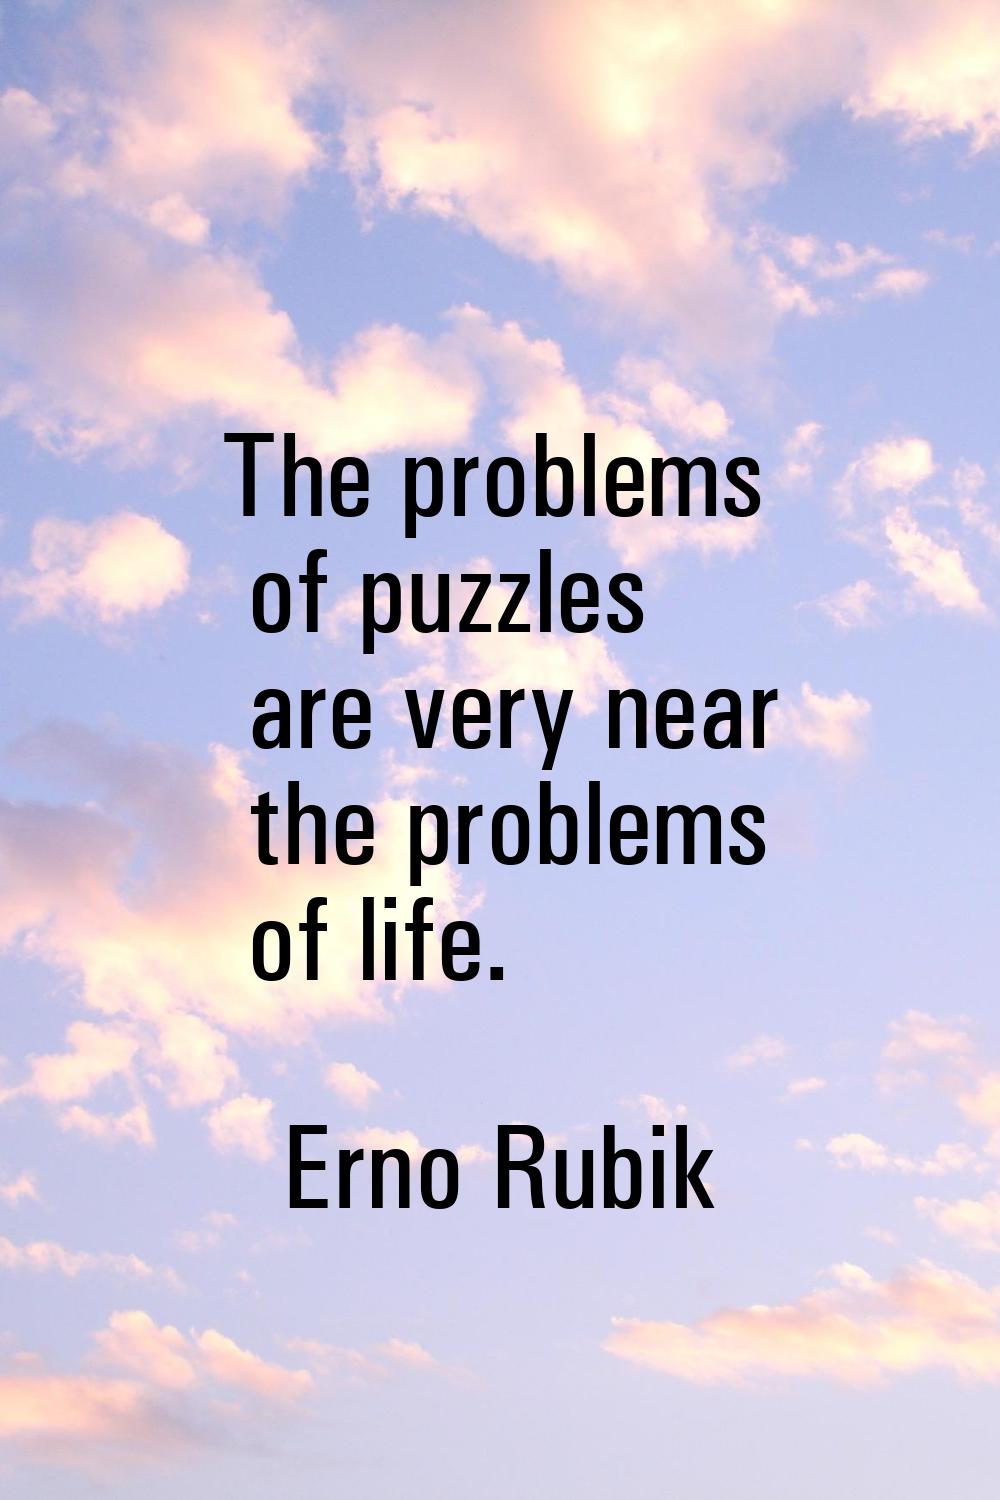 The problems of puzzles are very near the problems of life.